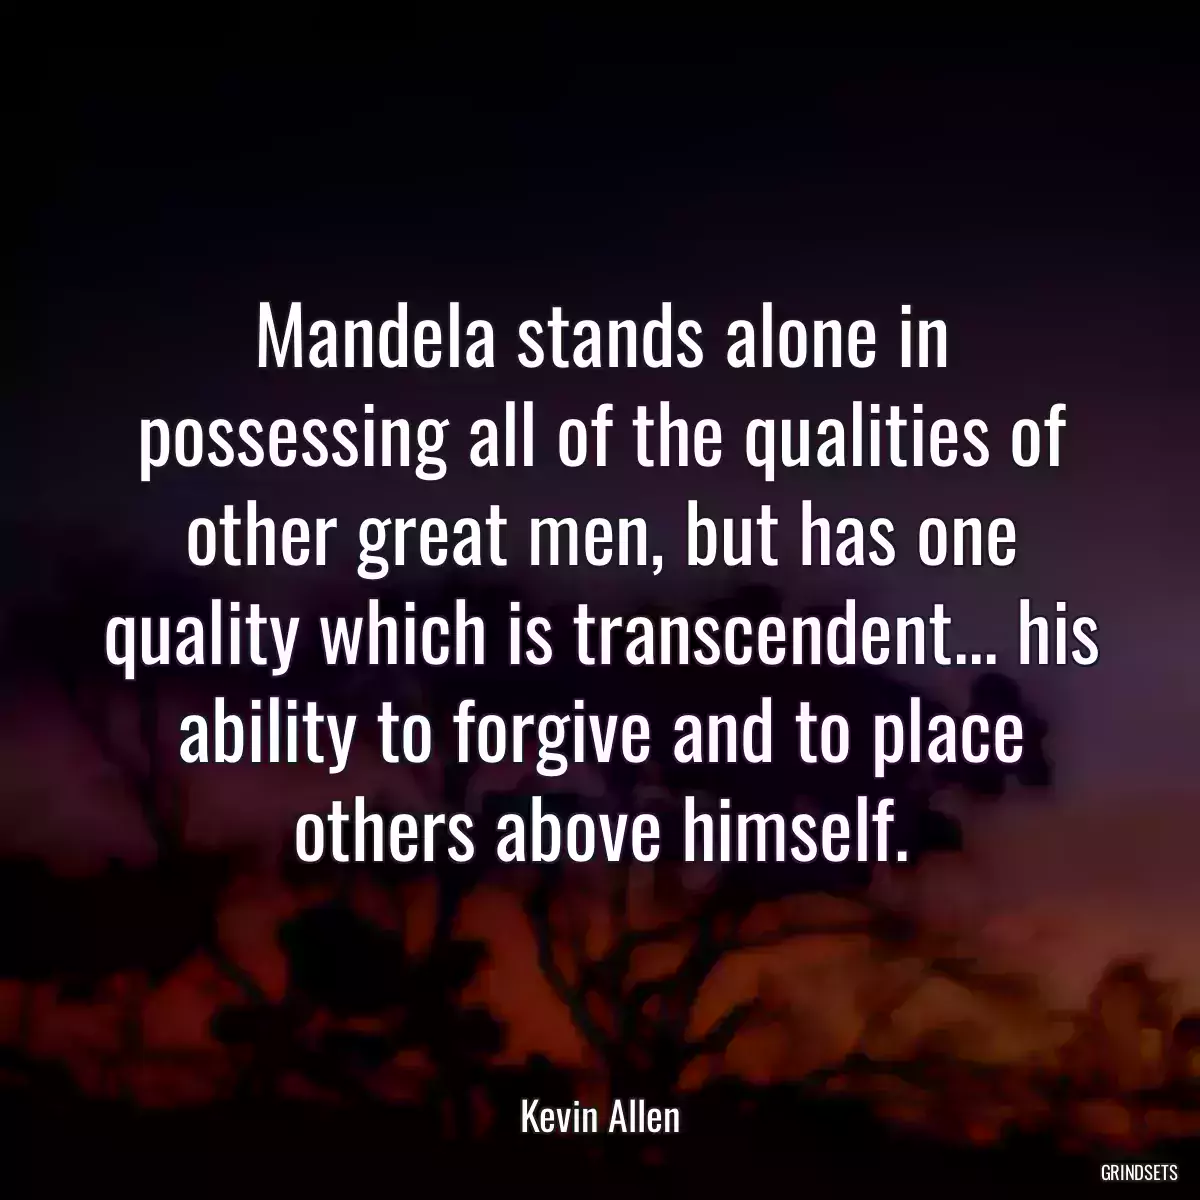 Mandela stands alone in possessing all of the qualities of other great men, but has one quality which is transcendent... his ability to forgive and to place others above himself.